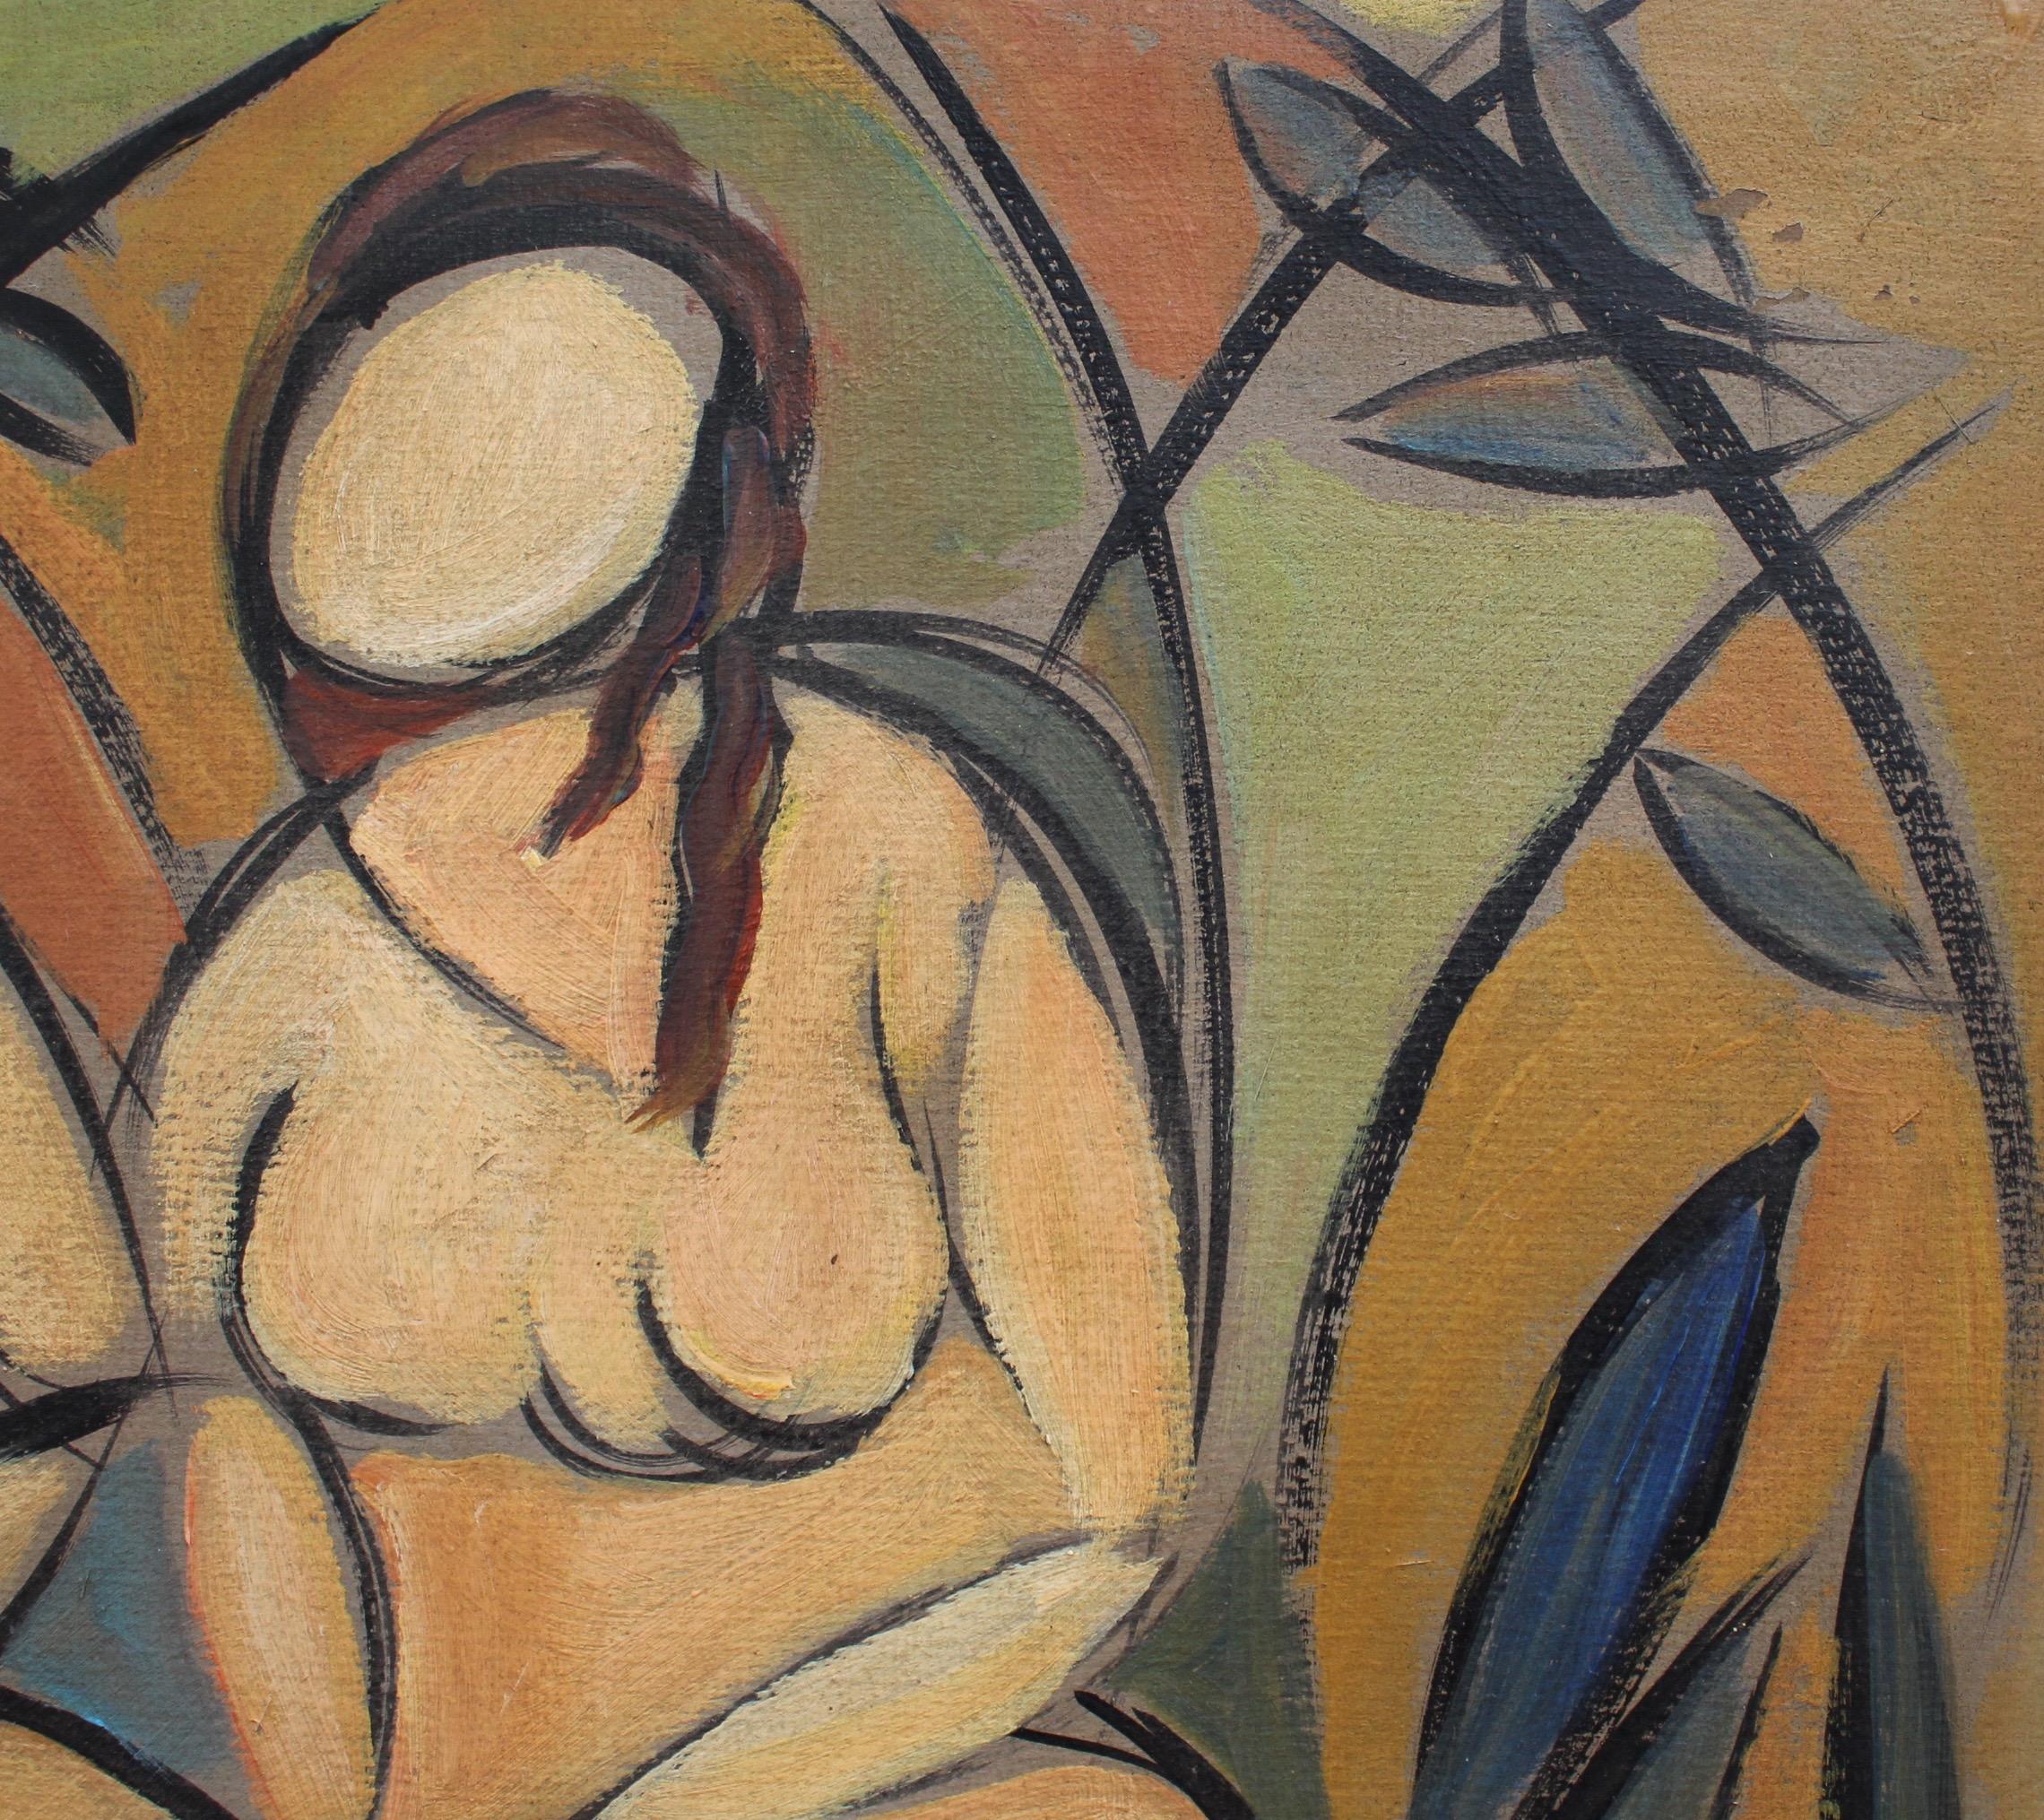 'Two Nudes in Landscape' by STM, Modern Cubist Portrait Oil Painting, Berlin 8